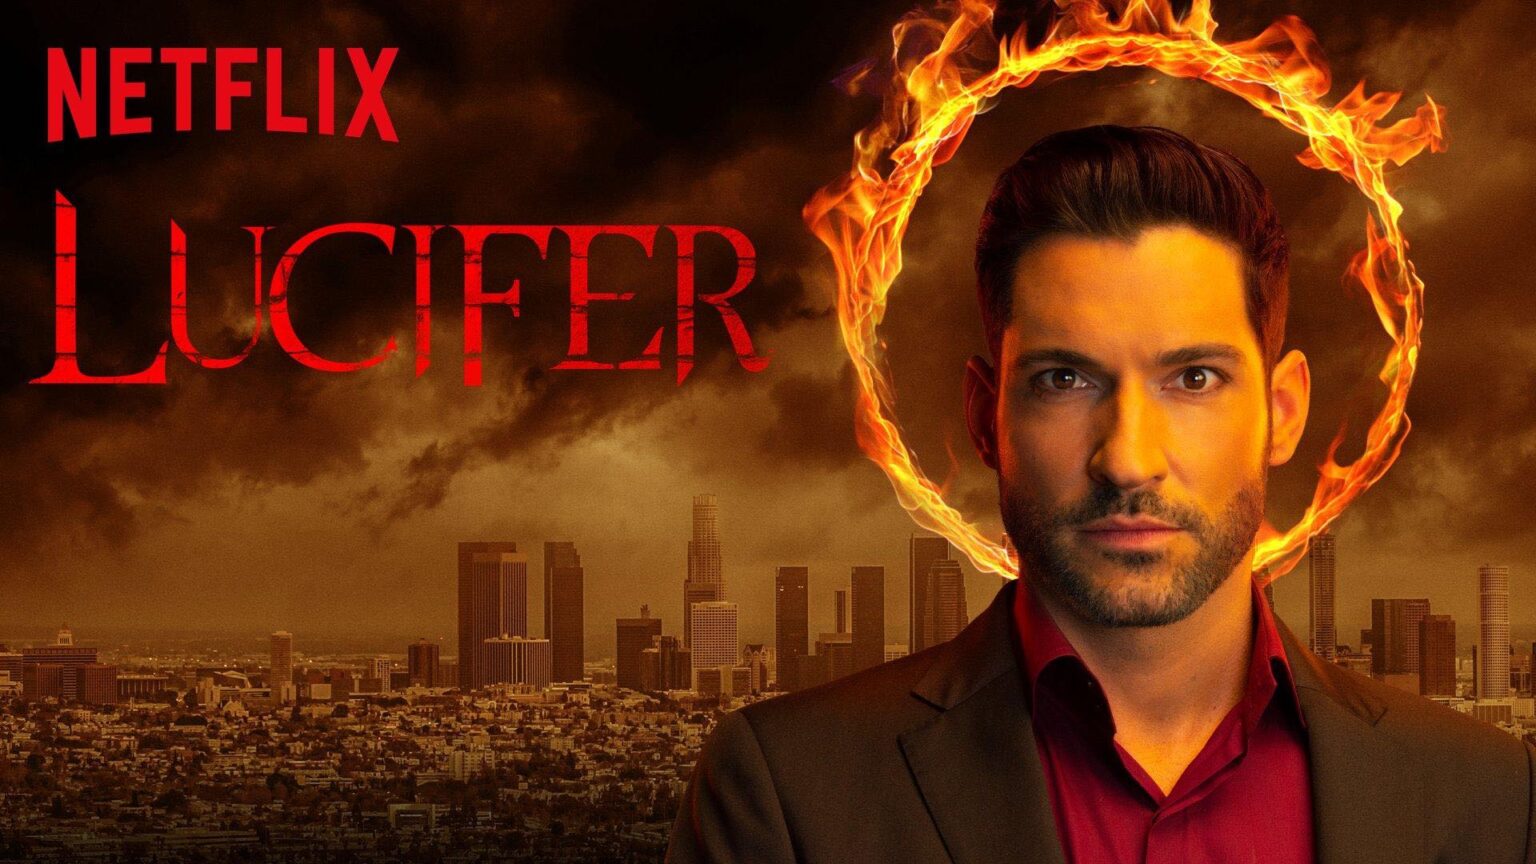 Fans of 'Lucifer' won’t have to wait much longer. Here are all the new cast members we’re excited to have joining season 5 as it heads for the end.